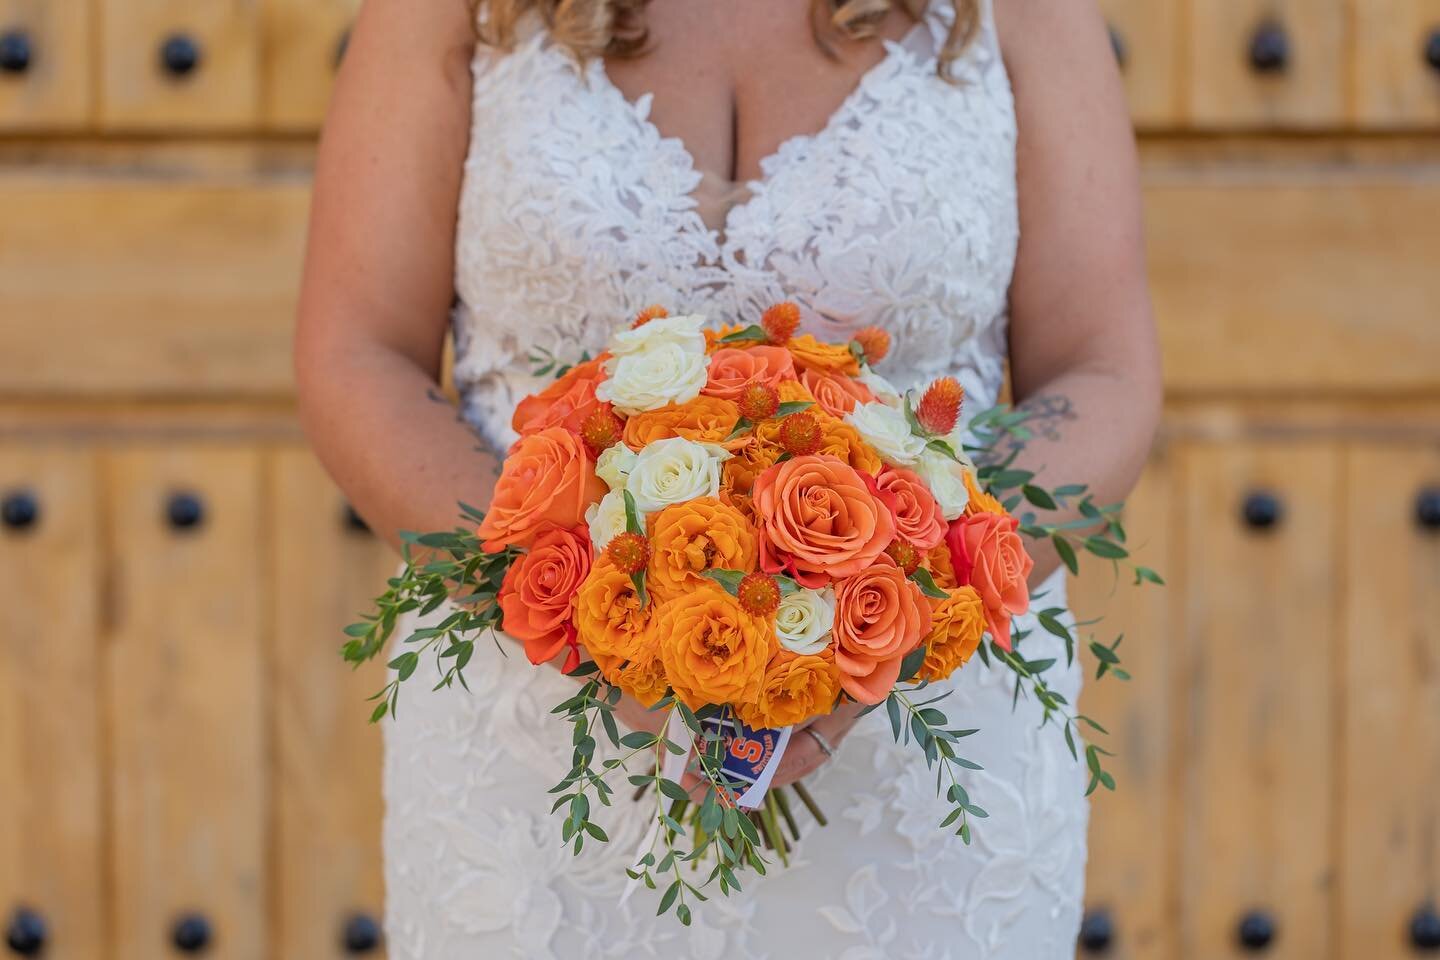 Any SU fans out there? 🏀 These flowers by #floribundadesigns are super fun and boy do they pop in photos! 🍁🍂 

#syracuseuniversity #subasketball #wedding #floraldesign #weddingflowers #bridalflowers #bridalbouquet #floralarrangement #dibblesinn #t